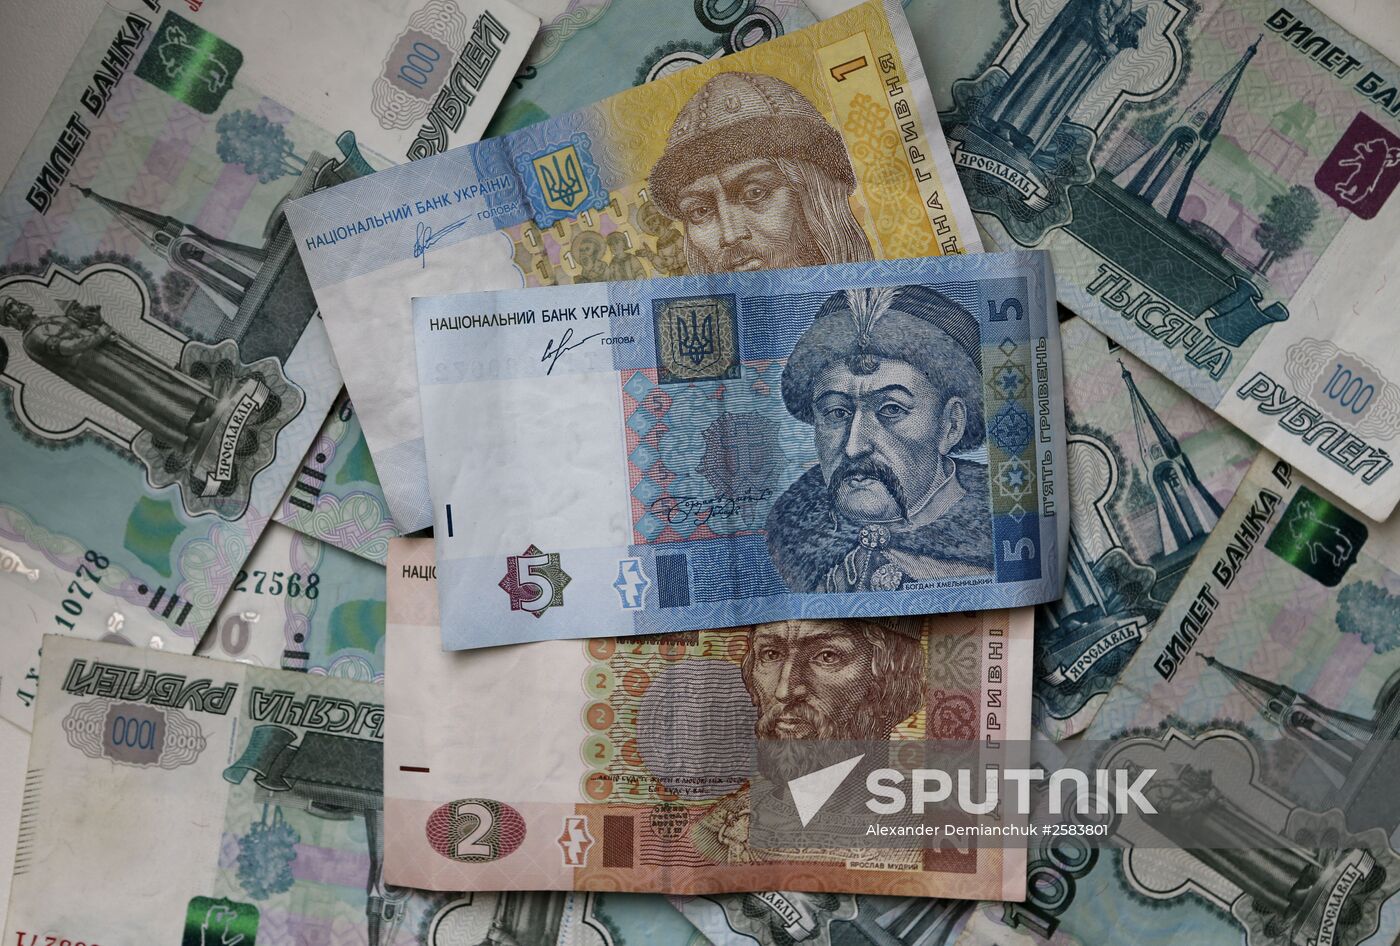 Russian and Ukrainian bills and coins